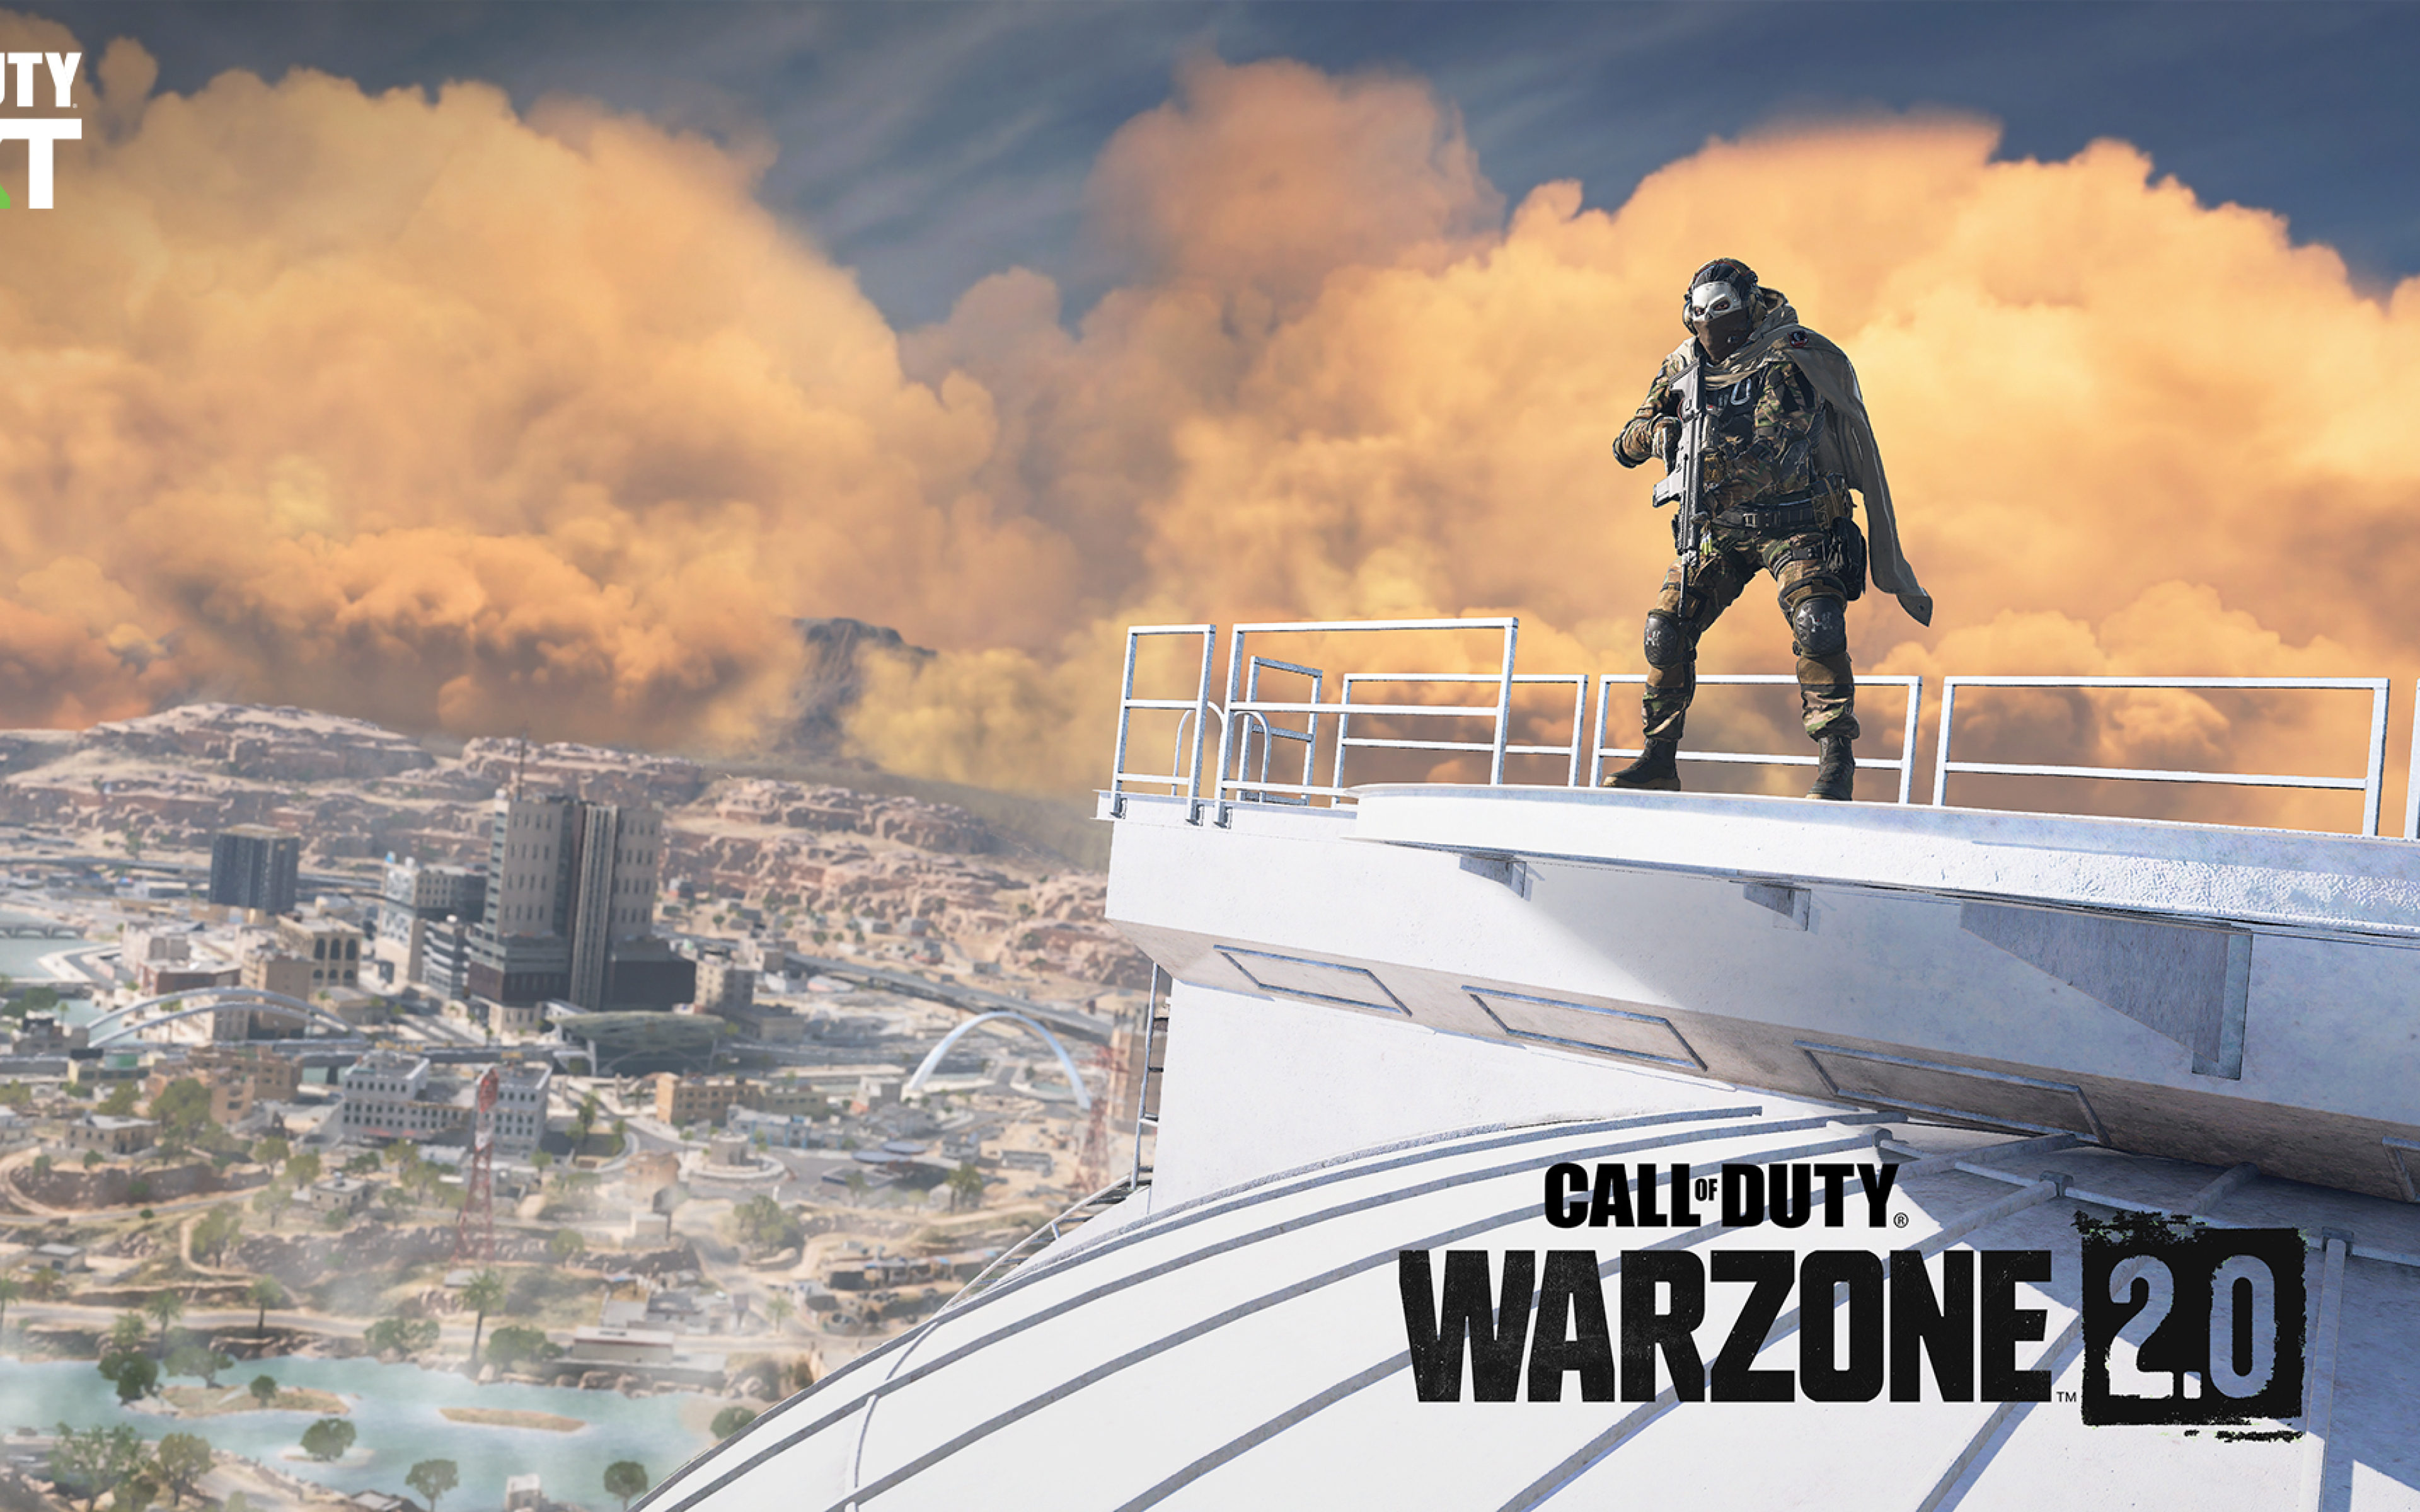 20 Call of Duty Warzone 20 HD Wallpapers and Backgrounds